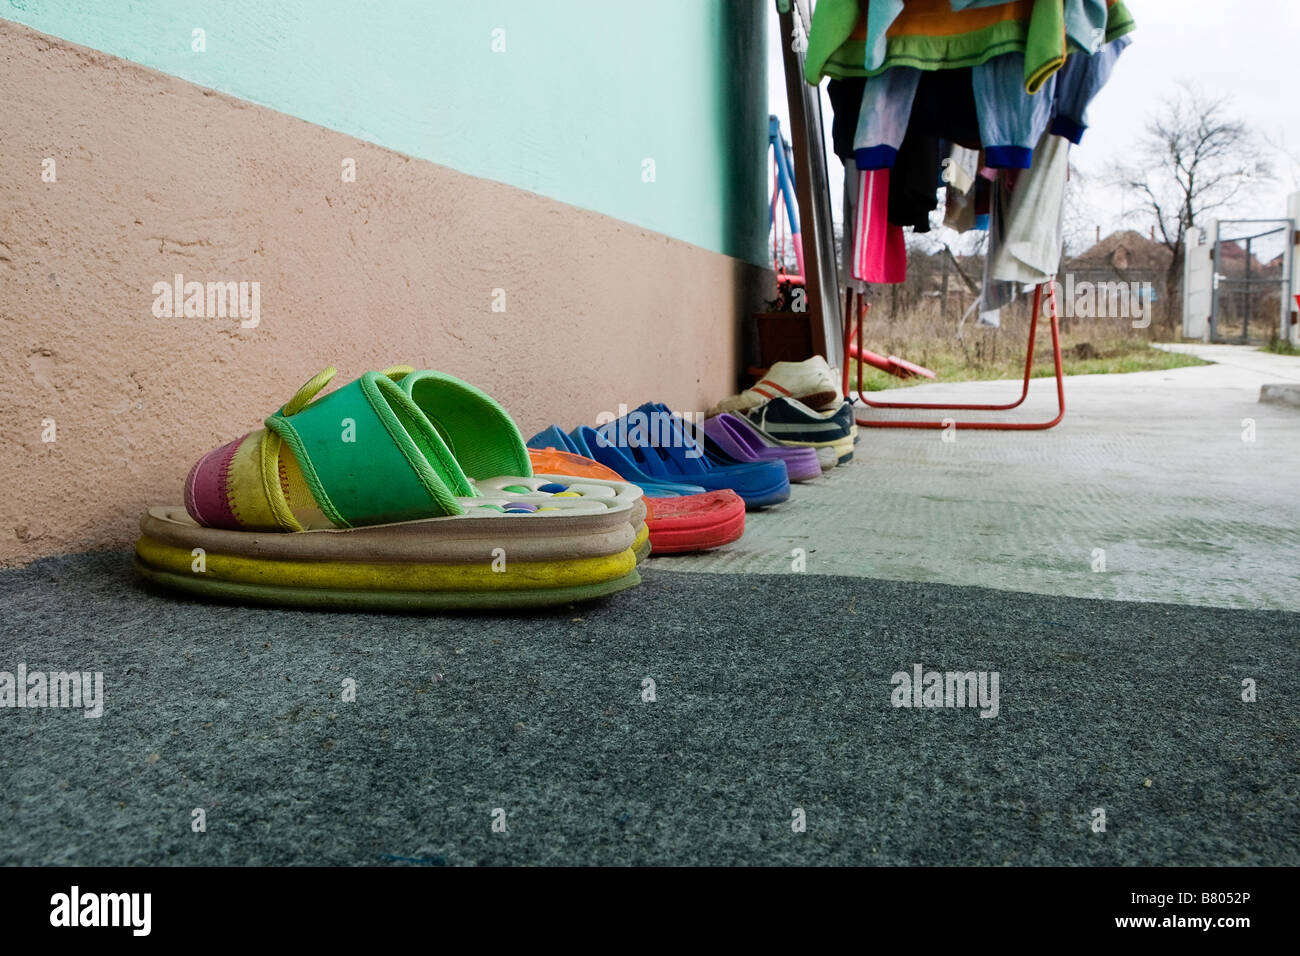 Childrens footwear outside a Romanian orphanage or placement centre in the village of Tinca Stock Photo